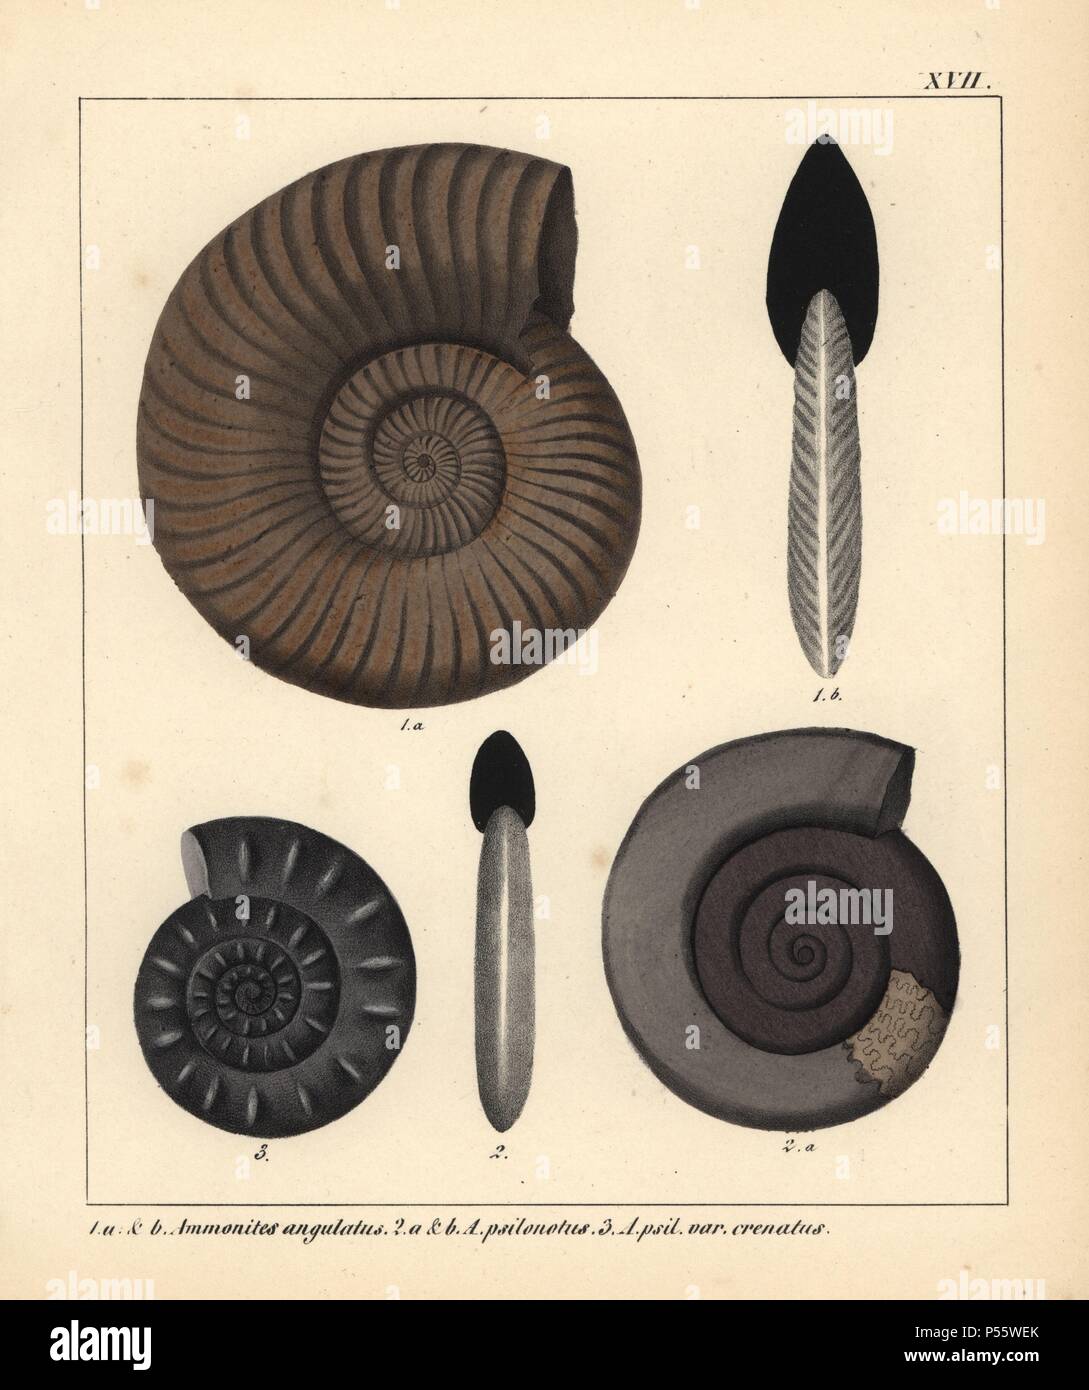 Fossils of extinct encephalopods: Ammonites angulatus, A. psilonotus and A. psilonotus var. crenatus. Handcoloured lithograph by an unknown artist from Dr. F.A. Schmidt's 'Petrefactenbuch,' published in Stuttgart, Germany, 1855 by Verlag von Krais & Hoffmann. Dr. Schmidt's 'Book of Petrification' introduced fossils and palaeontology to both the specialist and general reader. Stock Photo